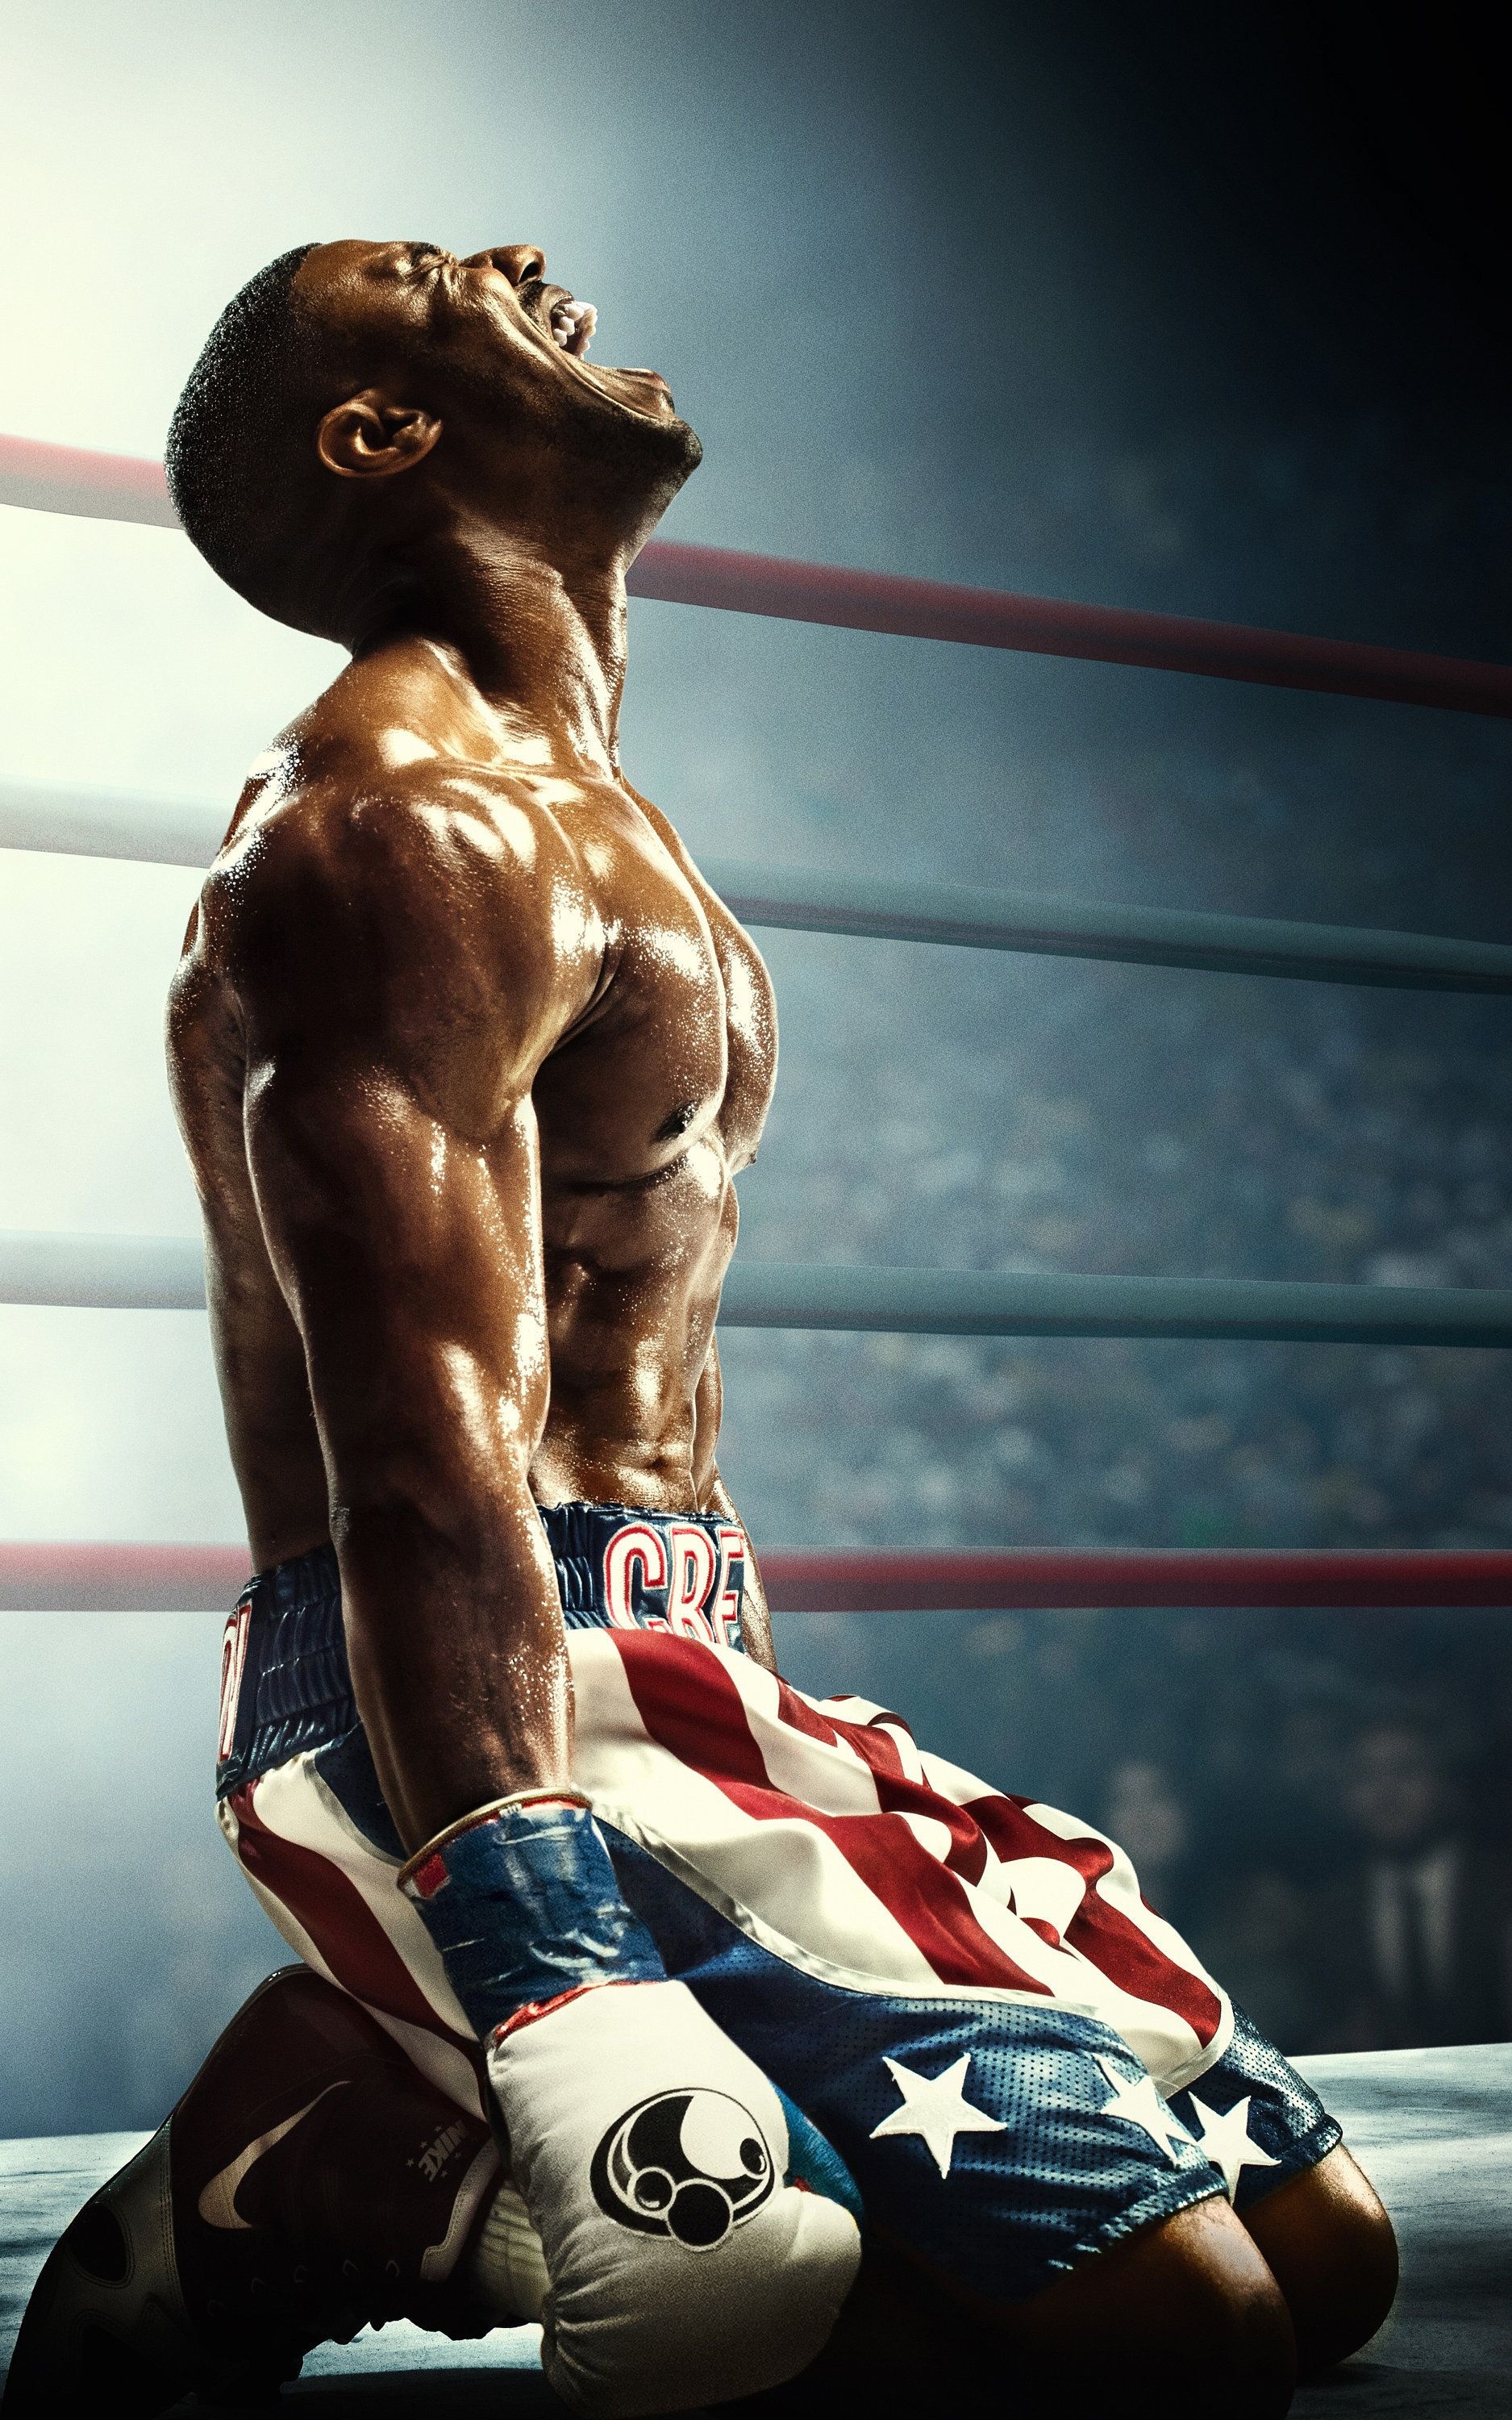 Creed movie, Boxing matches, Fighter's journey, Intense action, 1880x3000 HD Handy